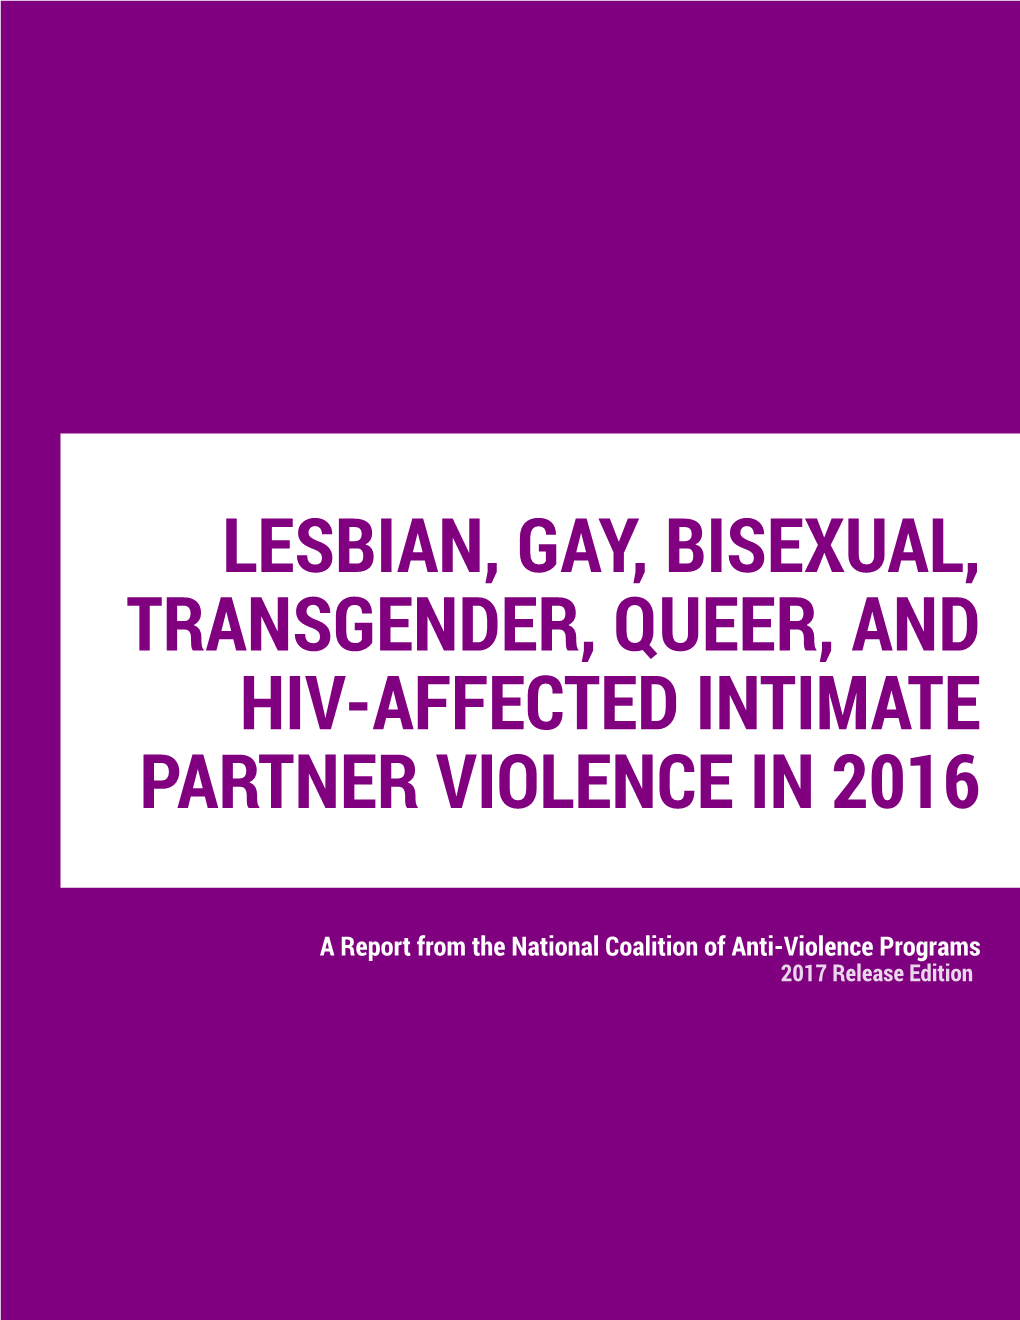 2016 Report on LGBTQ and HIV-Affected